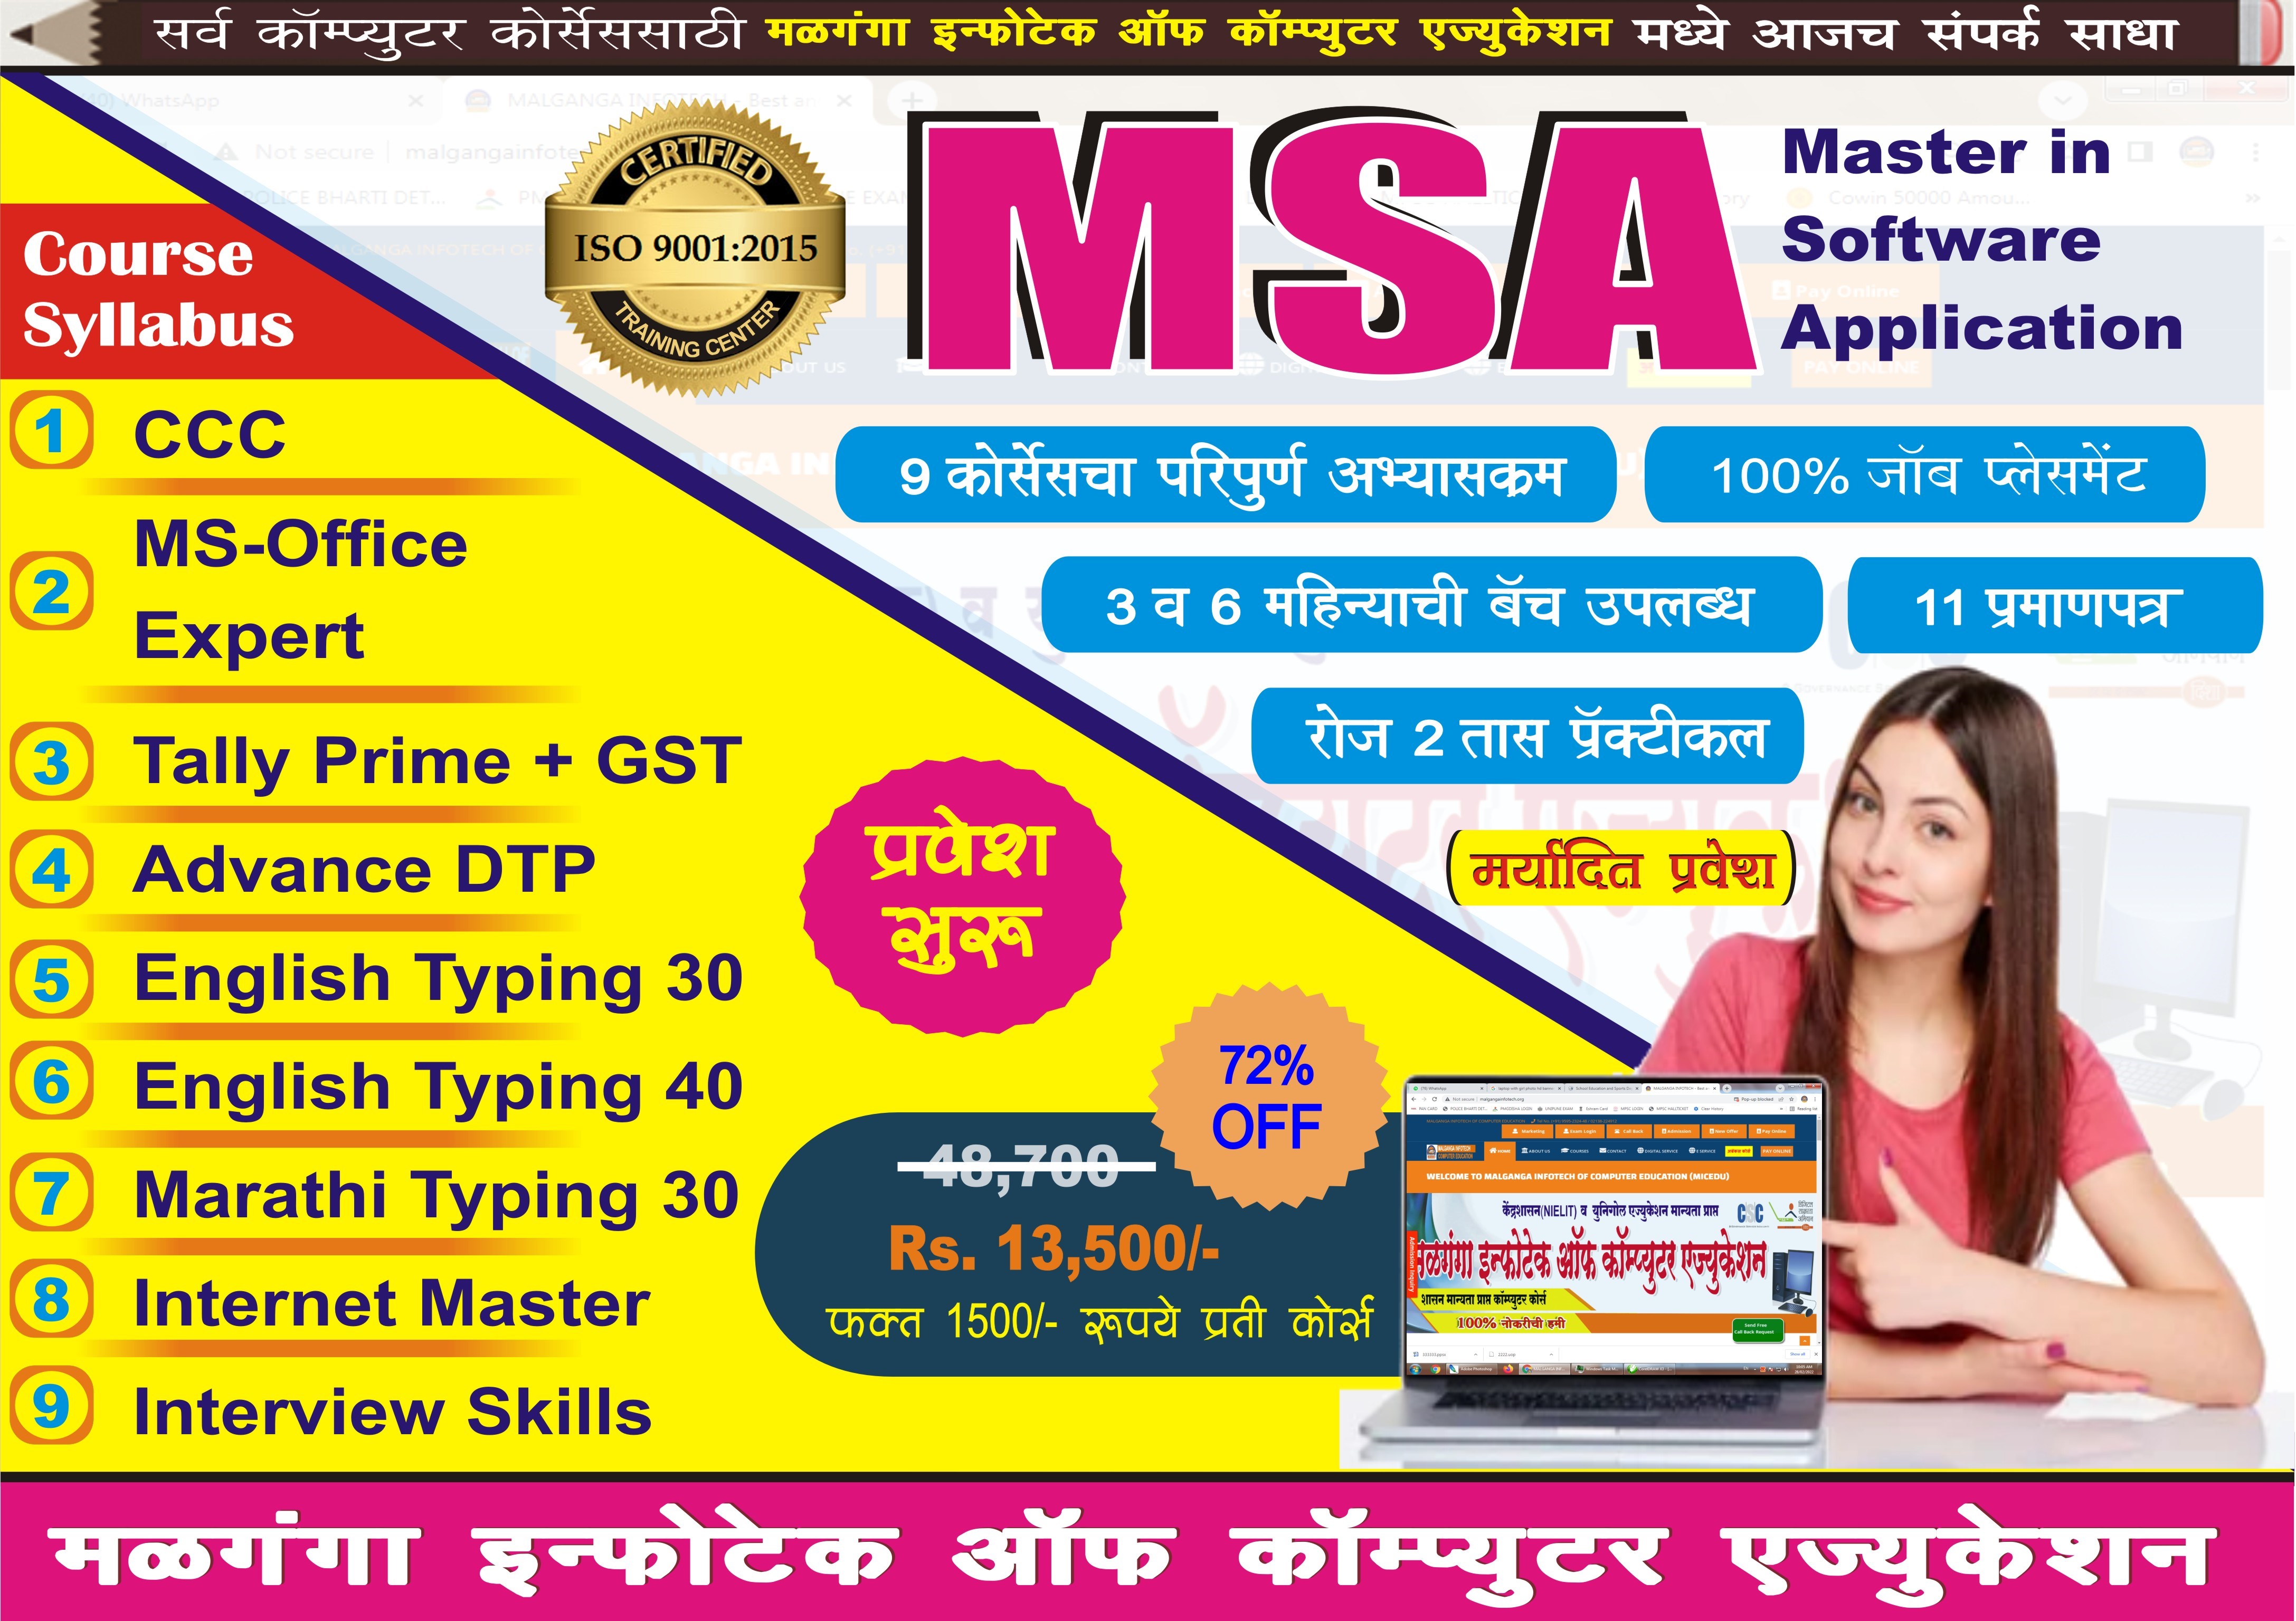 MSA (Master in Software Application)